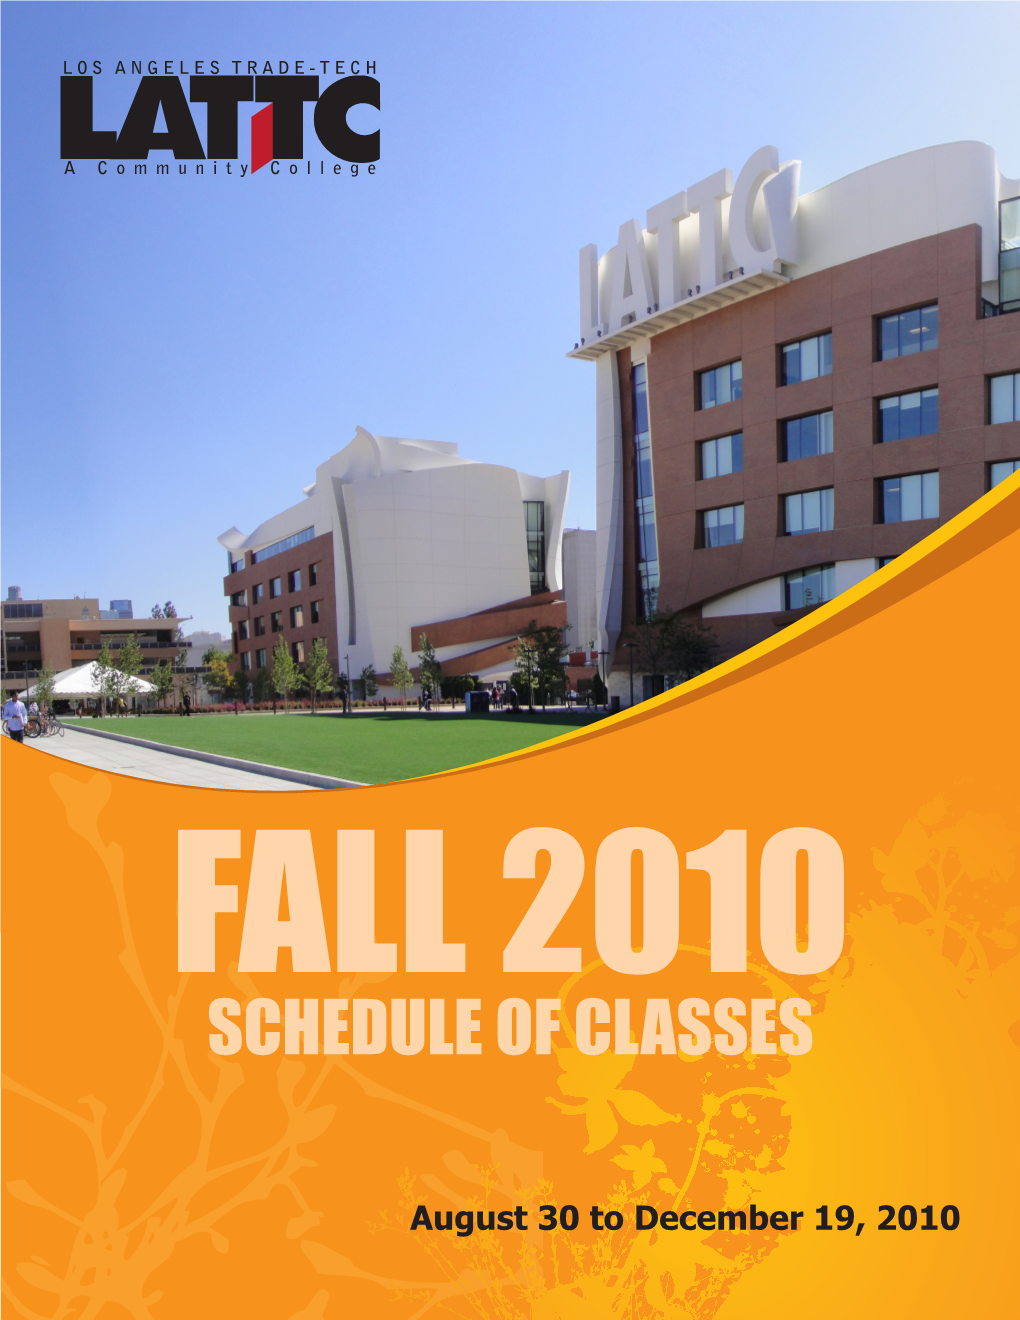 Fall 2010 – Schedule of Classes